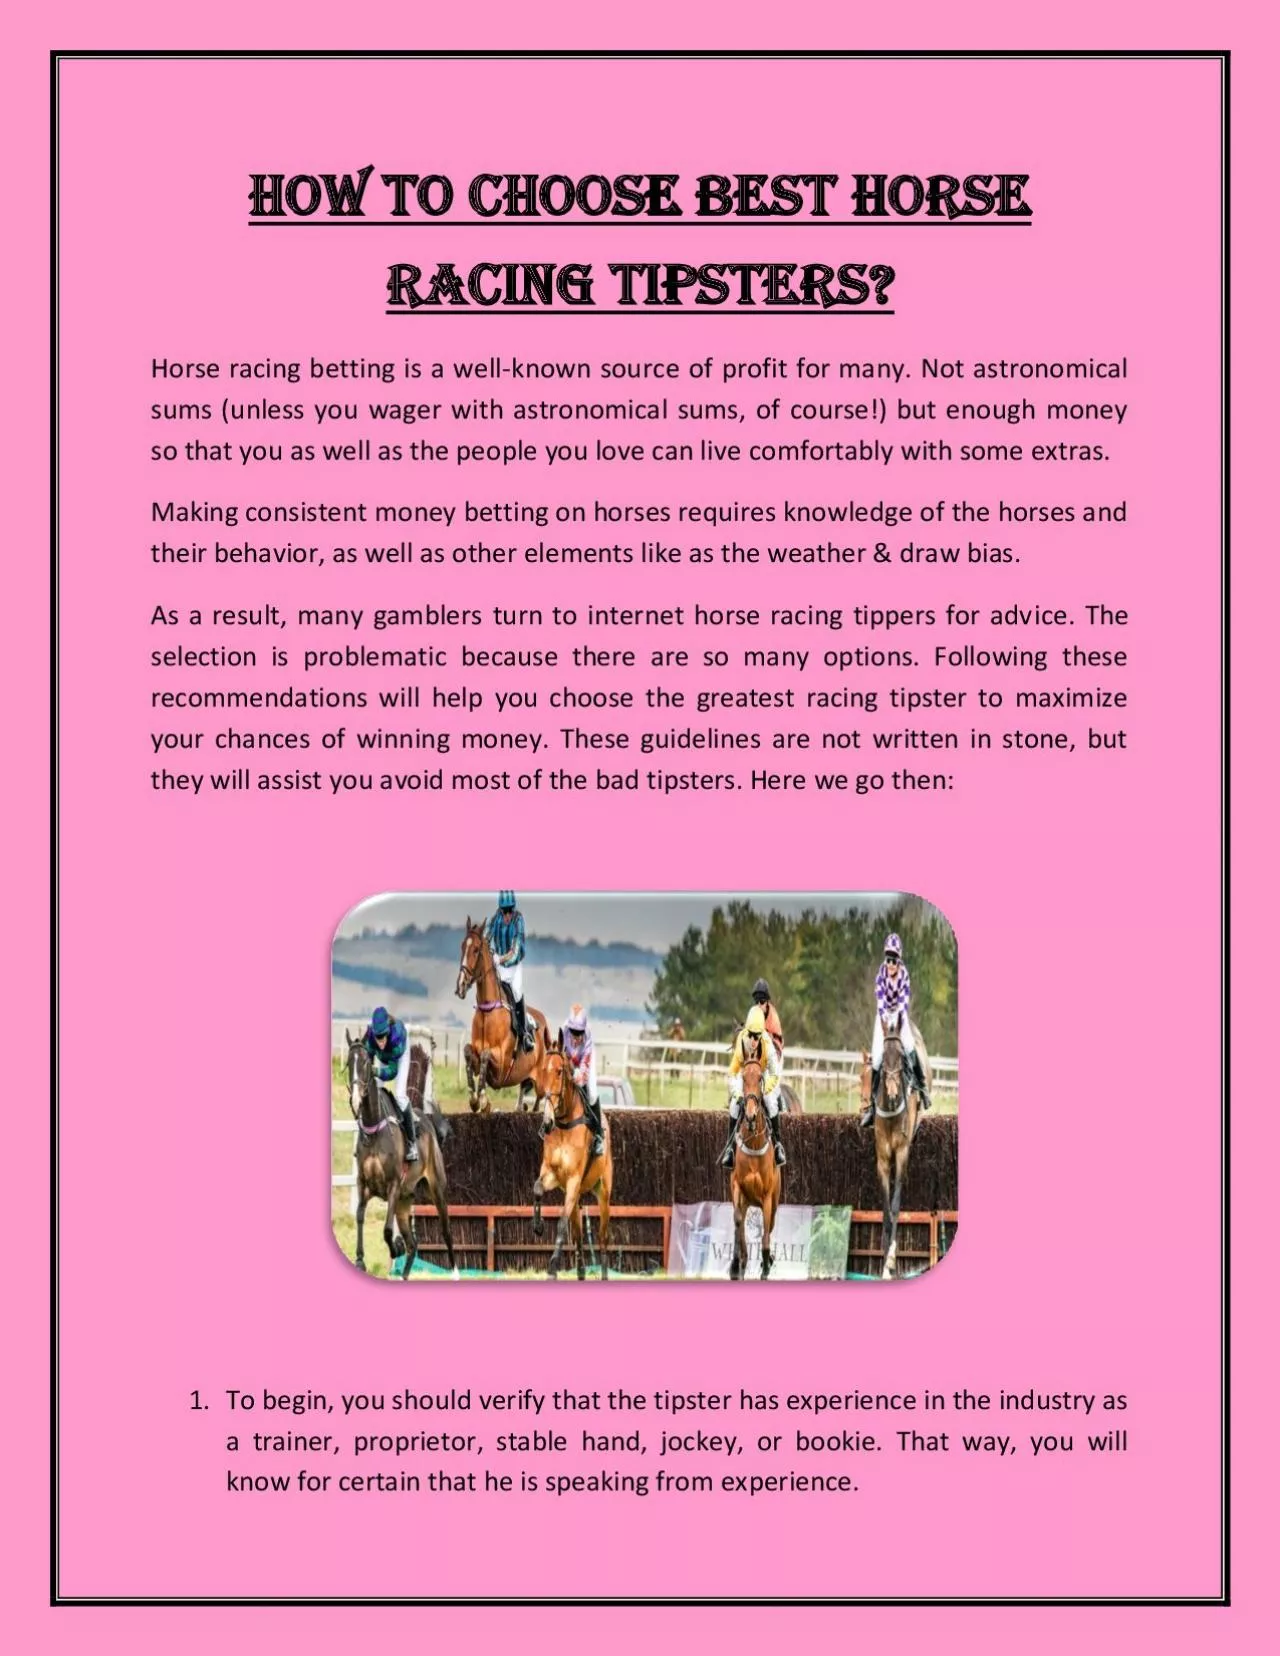 How to Choose Best Horse Racing Tipsters?